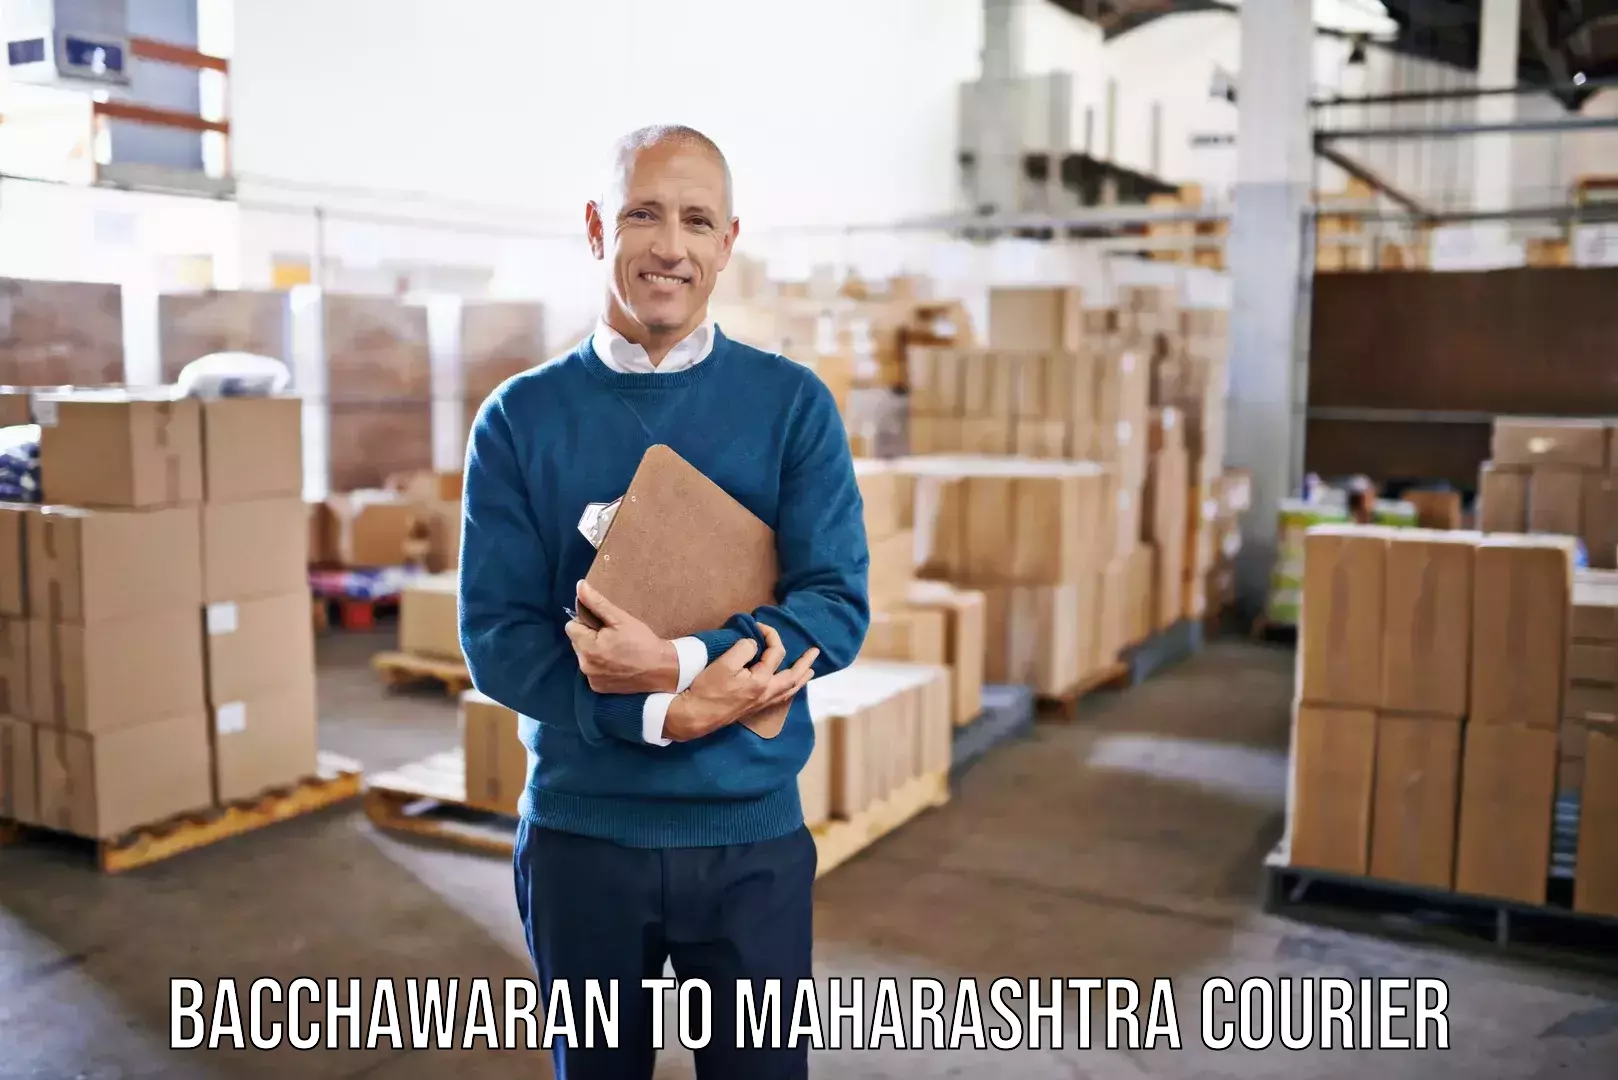 Furniture moving specialists in Bacchawaran to Maharashtra